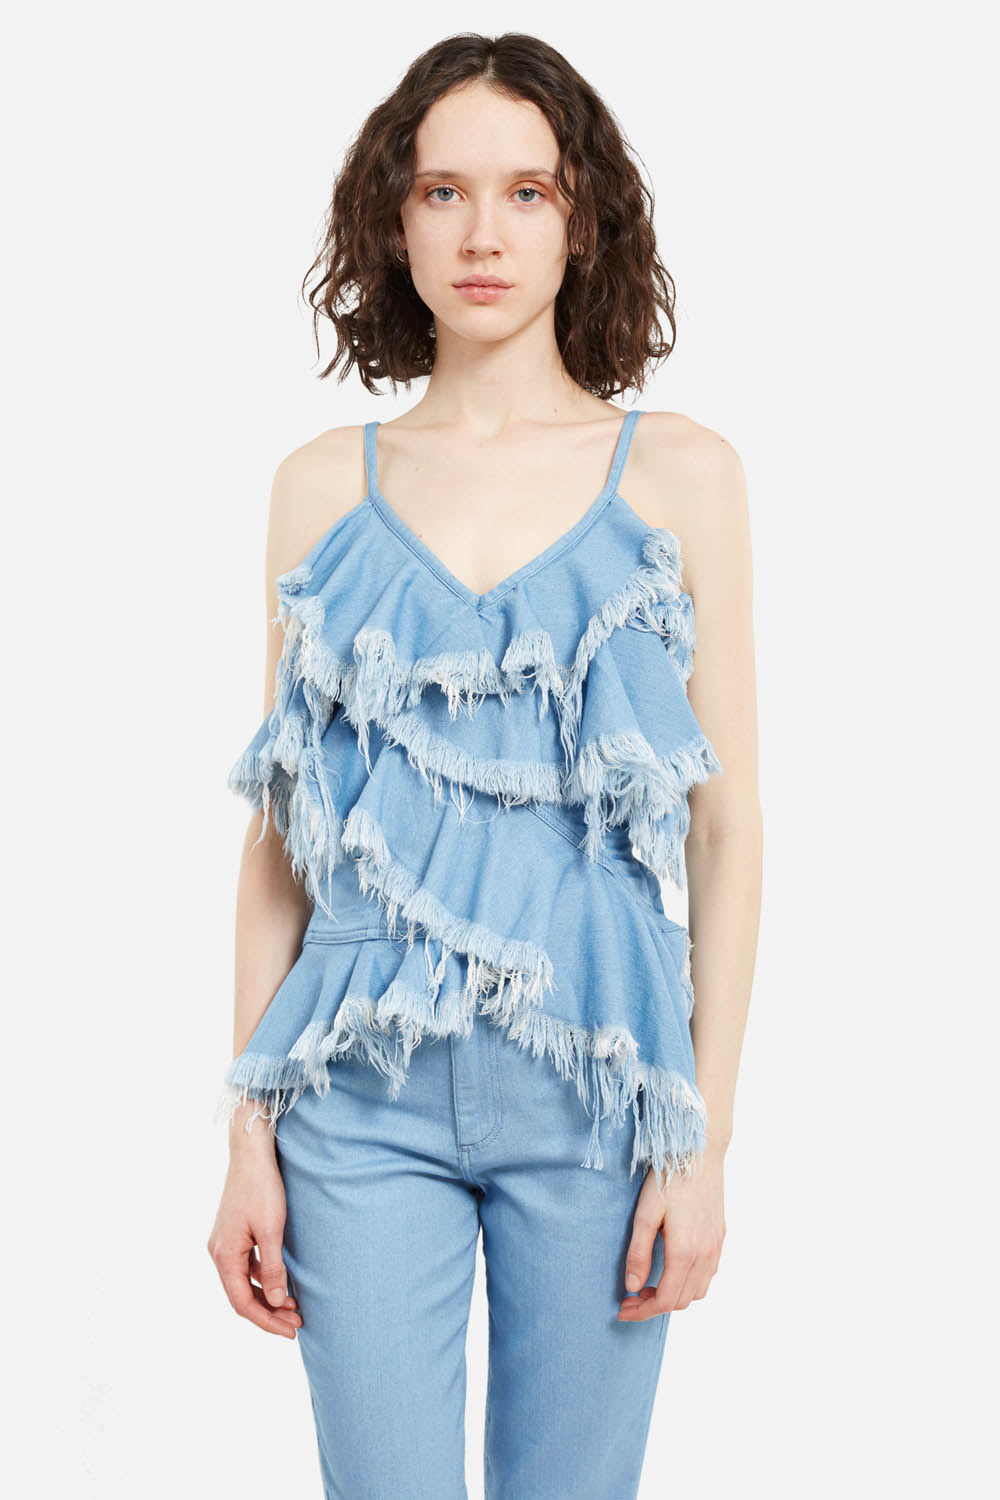 Marques' Almeida top, approx $430, from Opening Ceremony.